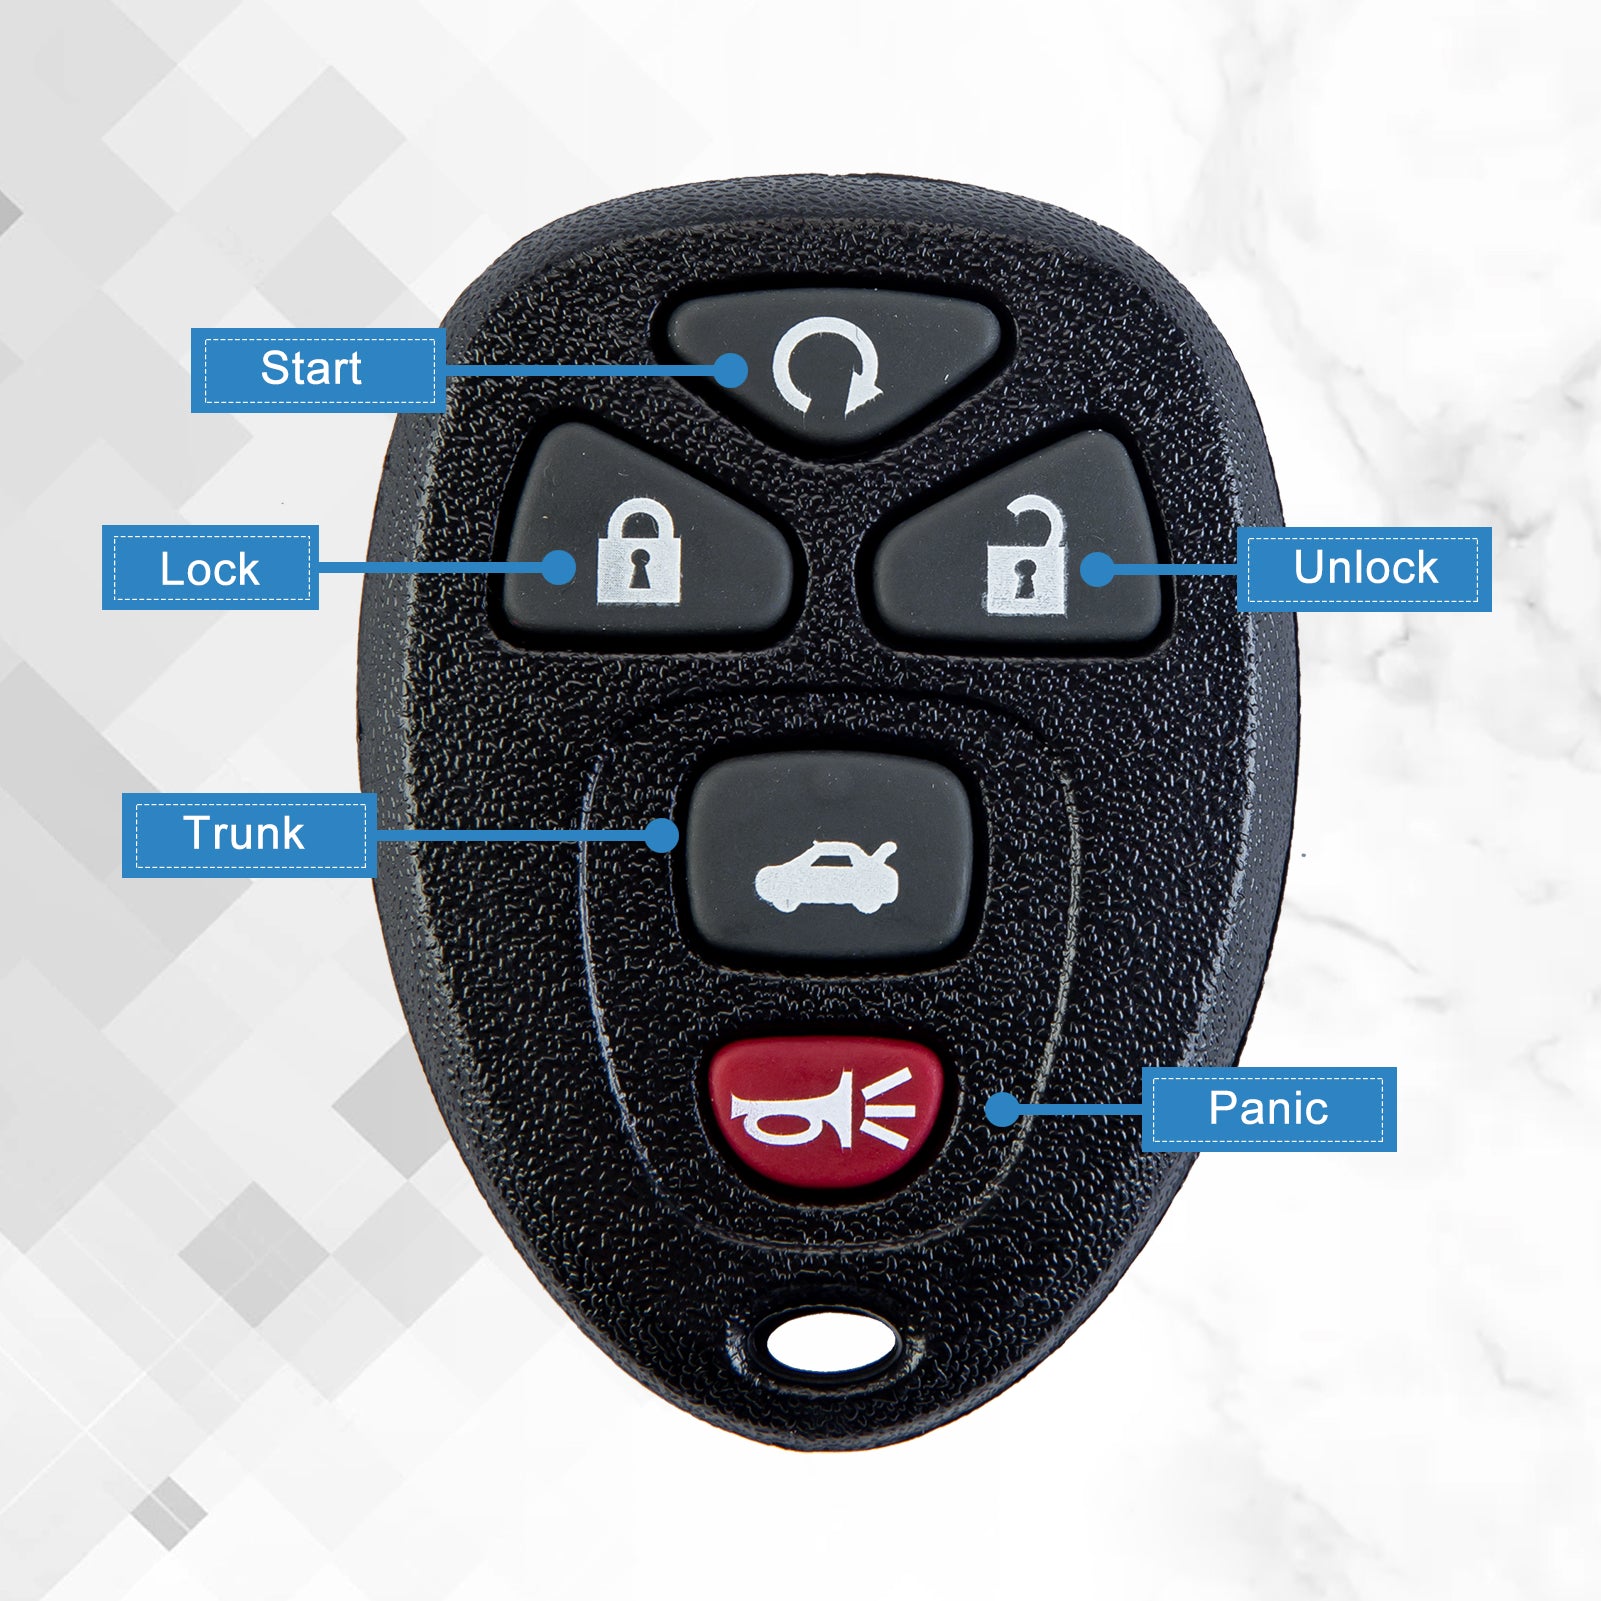 5 Button Keyless Entry Remote Replacement for 2006-2013 Chevy Impala Monte Carlo/Cadillac DTS/Buick Lucerne OUC60270